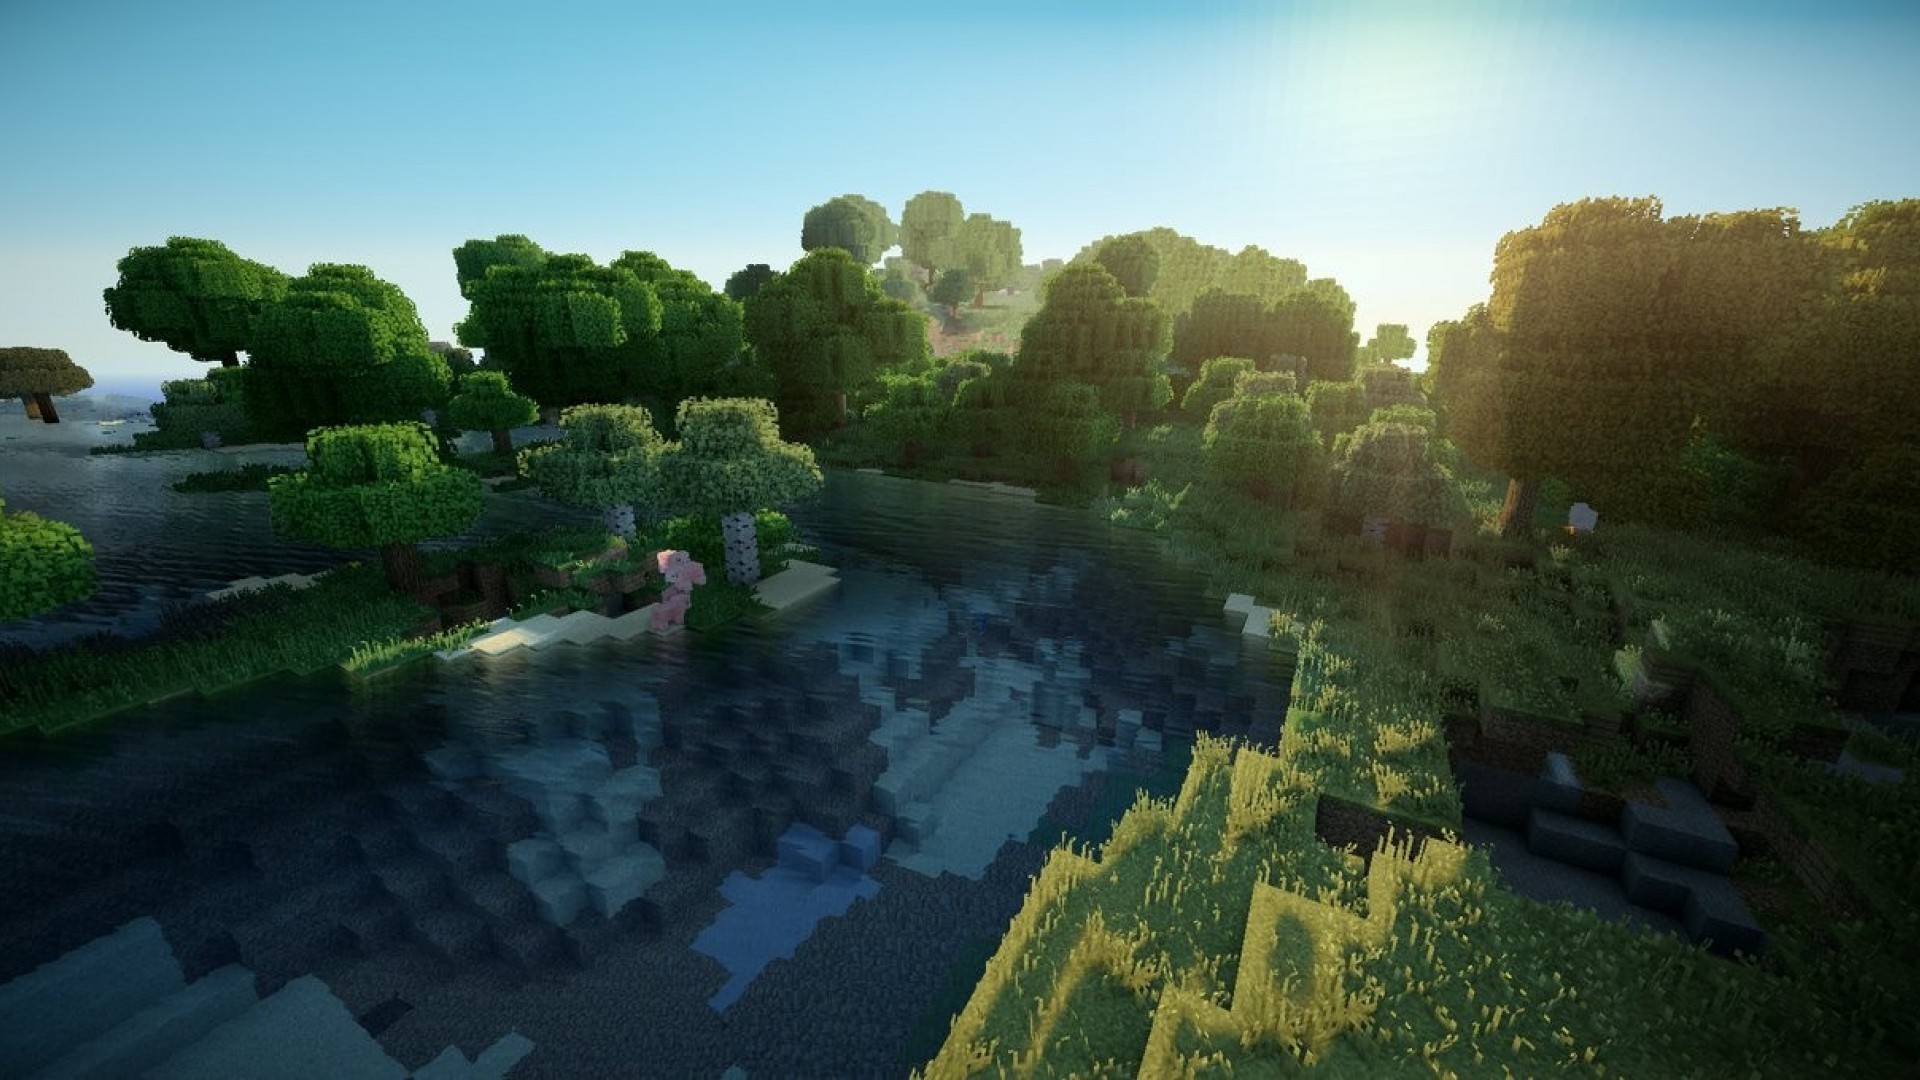 minecraft wallpaper 1920x1080,nature,biome,natural landscape,reflection,water